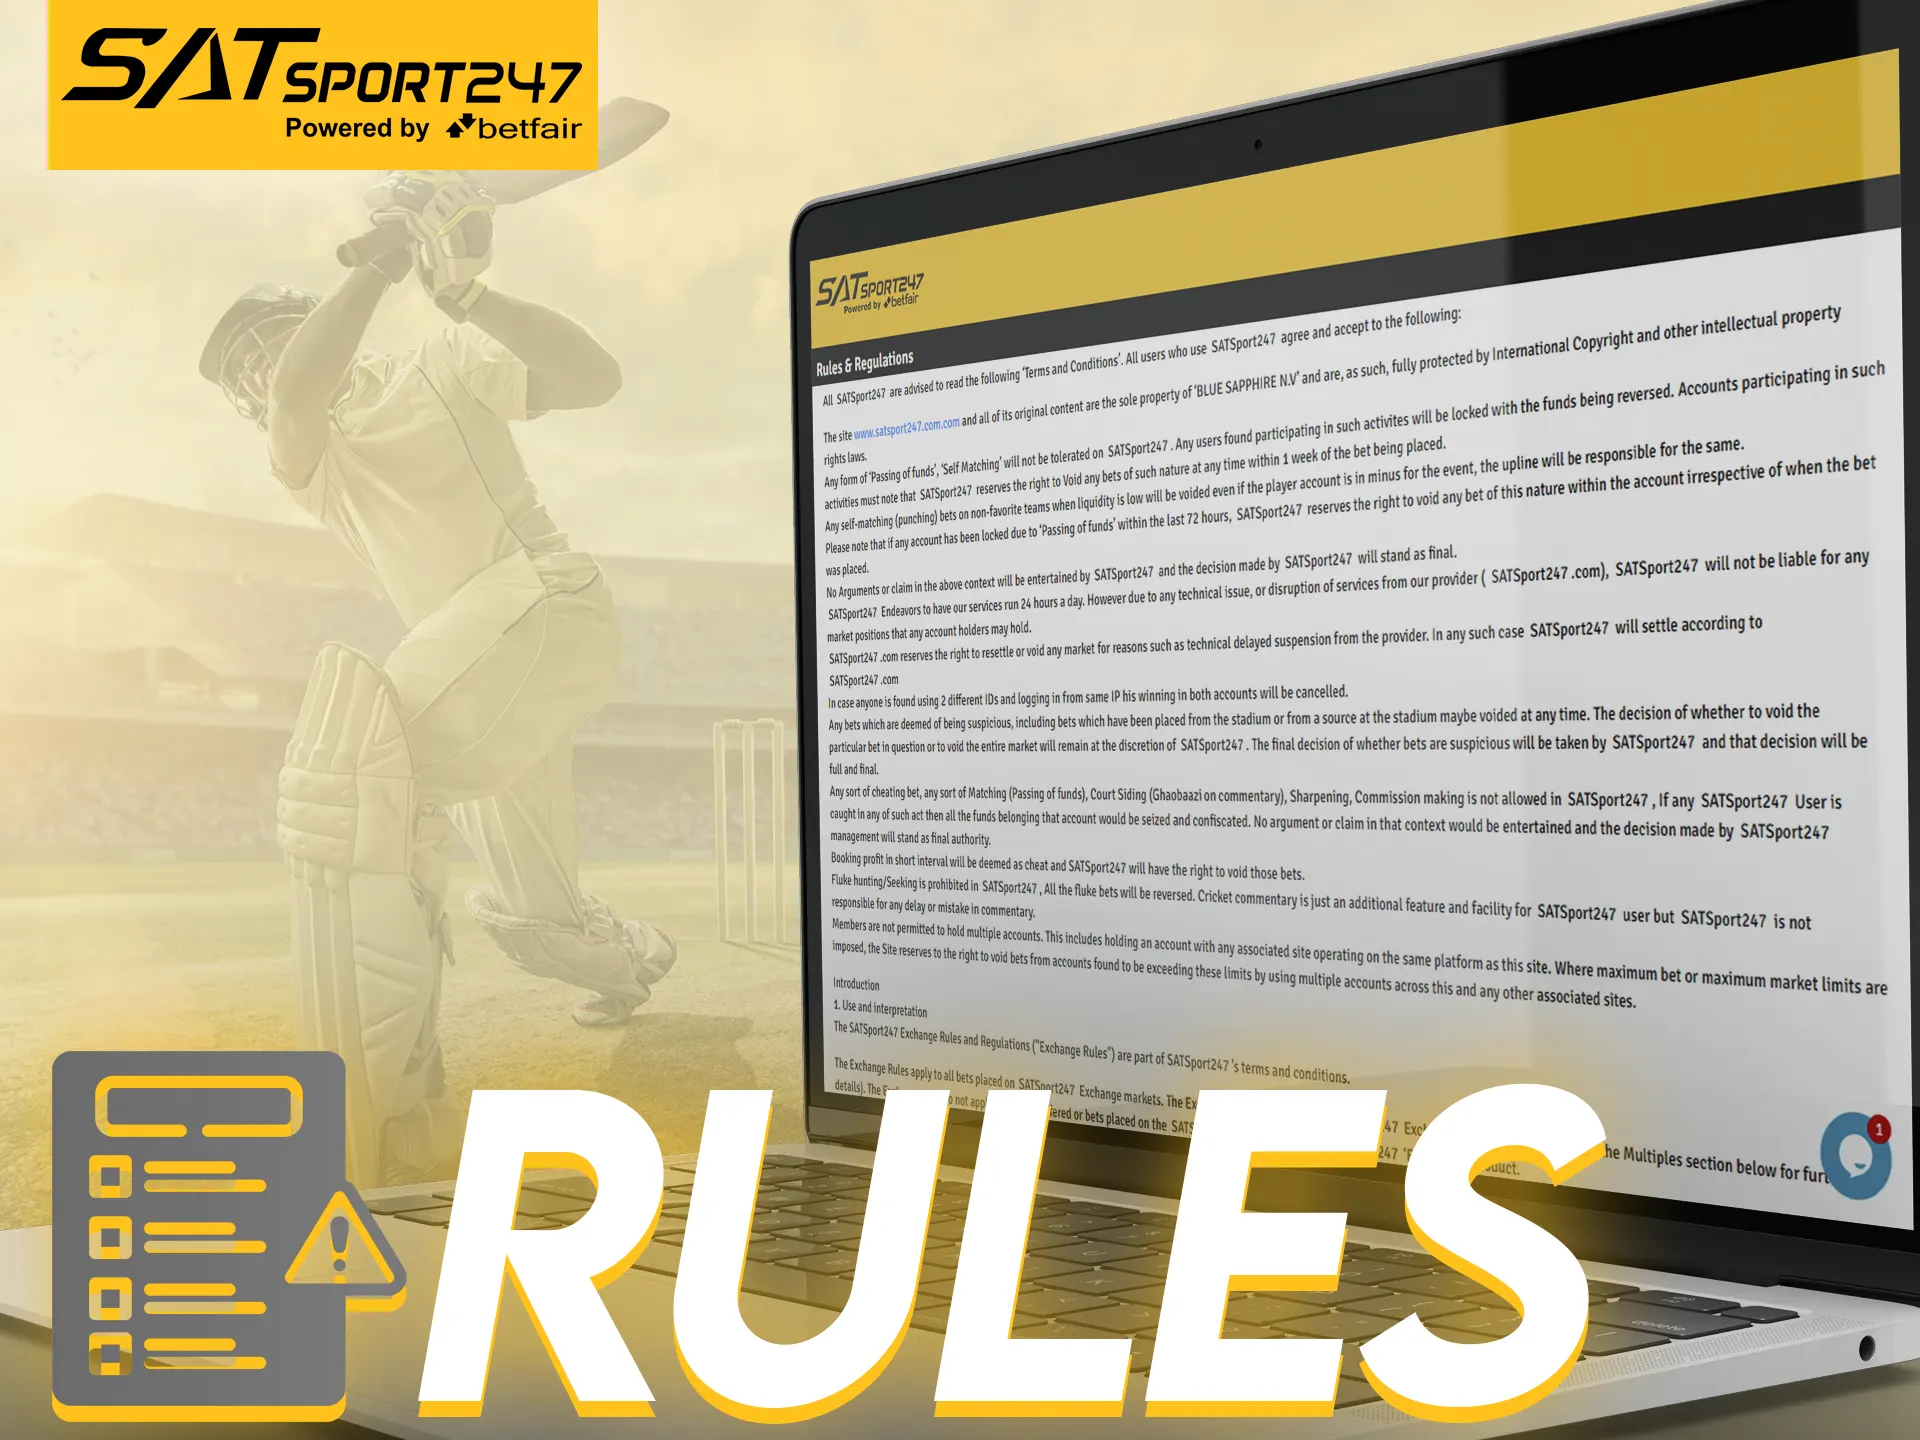 Read the basic rules of Satsport247.